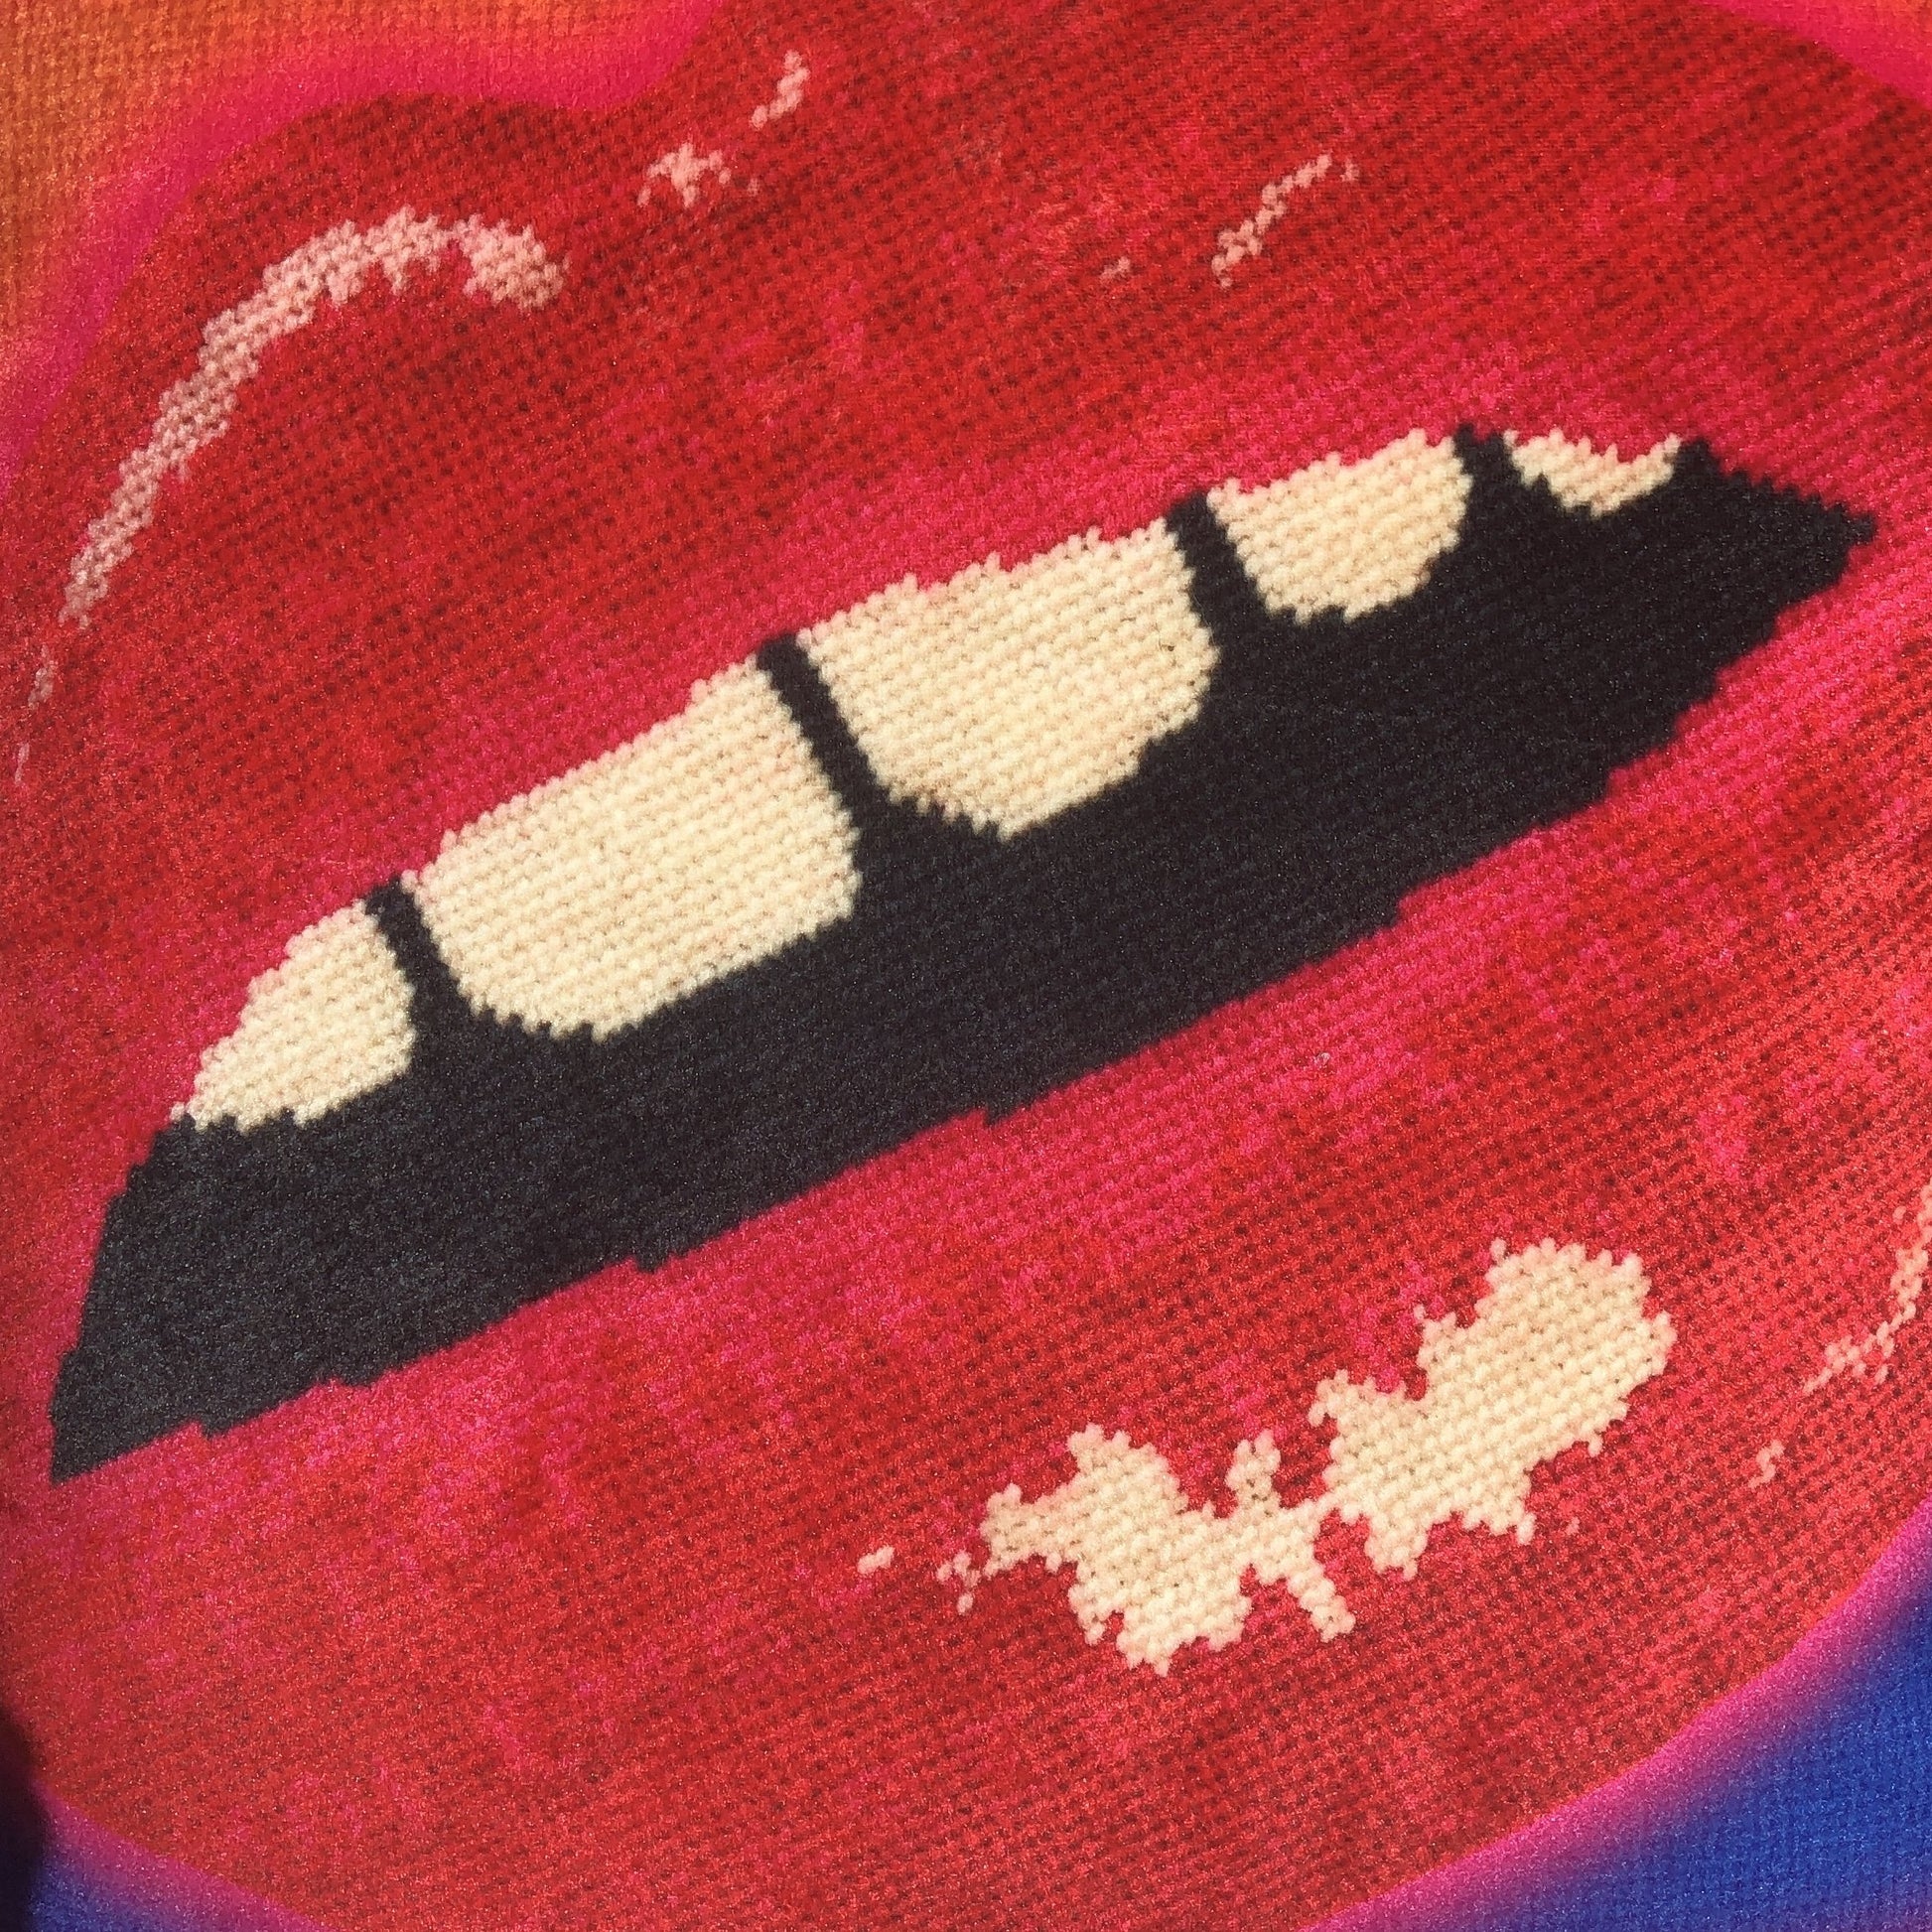 rainbow velvet pillow with large lips highlighted in neon pink